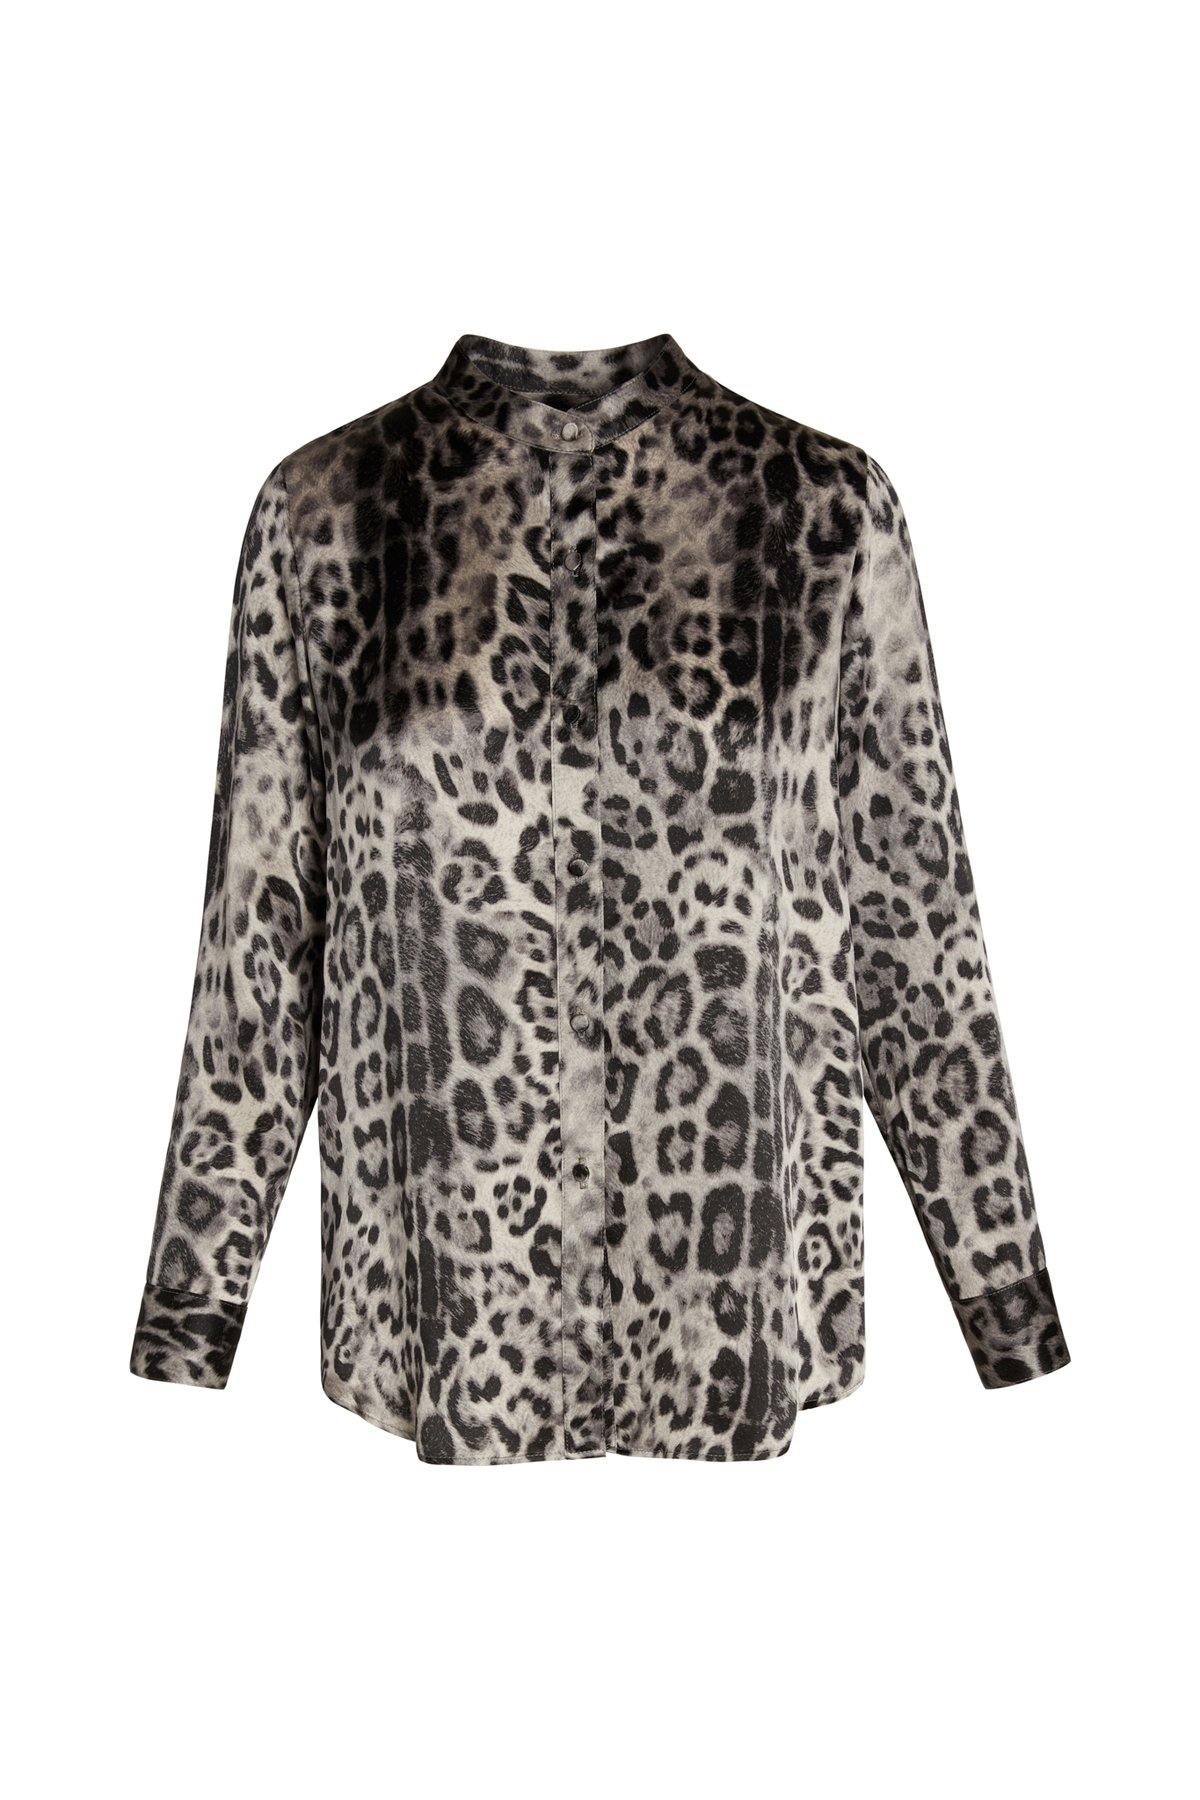 Laura Blouse in Snow Leopard by Catherine Gee - Haven